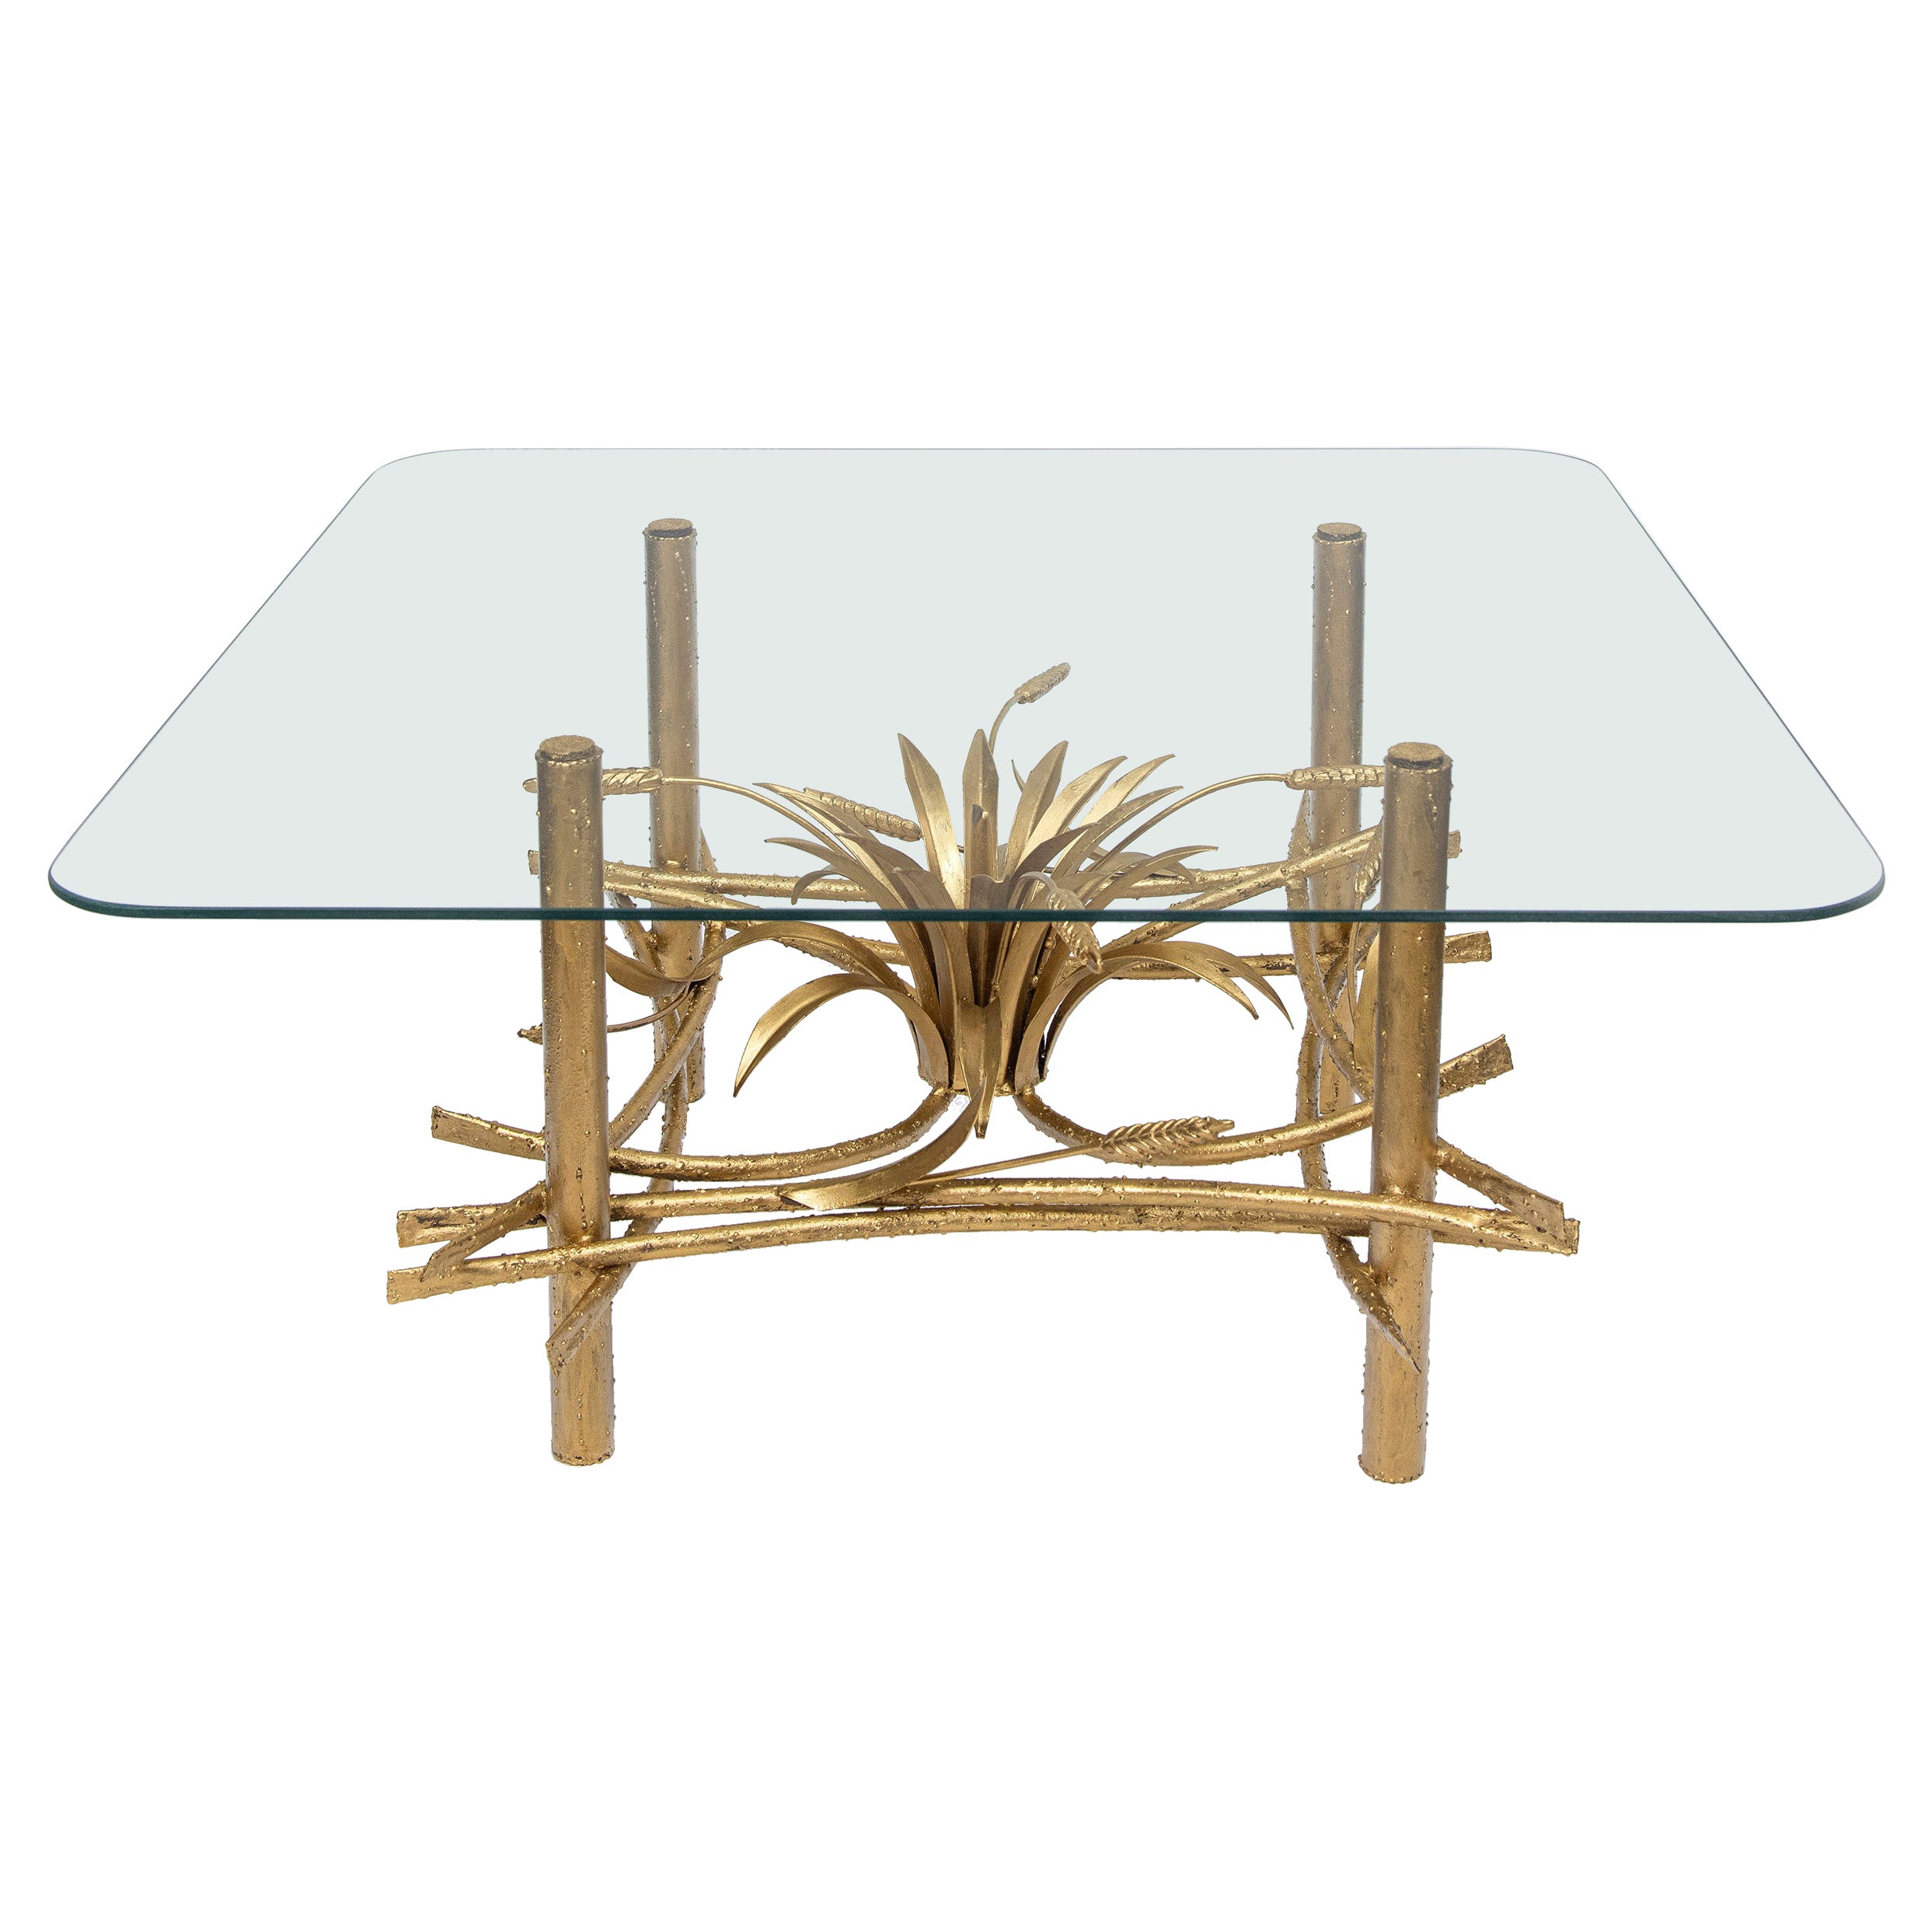 Painted Iron and Glass Low Table by Curtis Jere, United States, circa 1960 For Sale